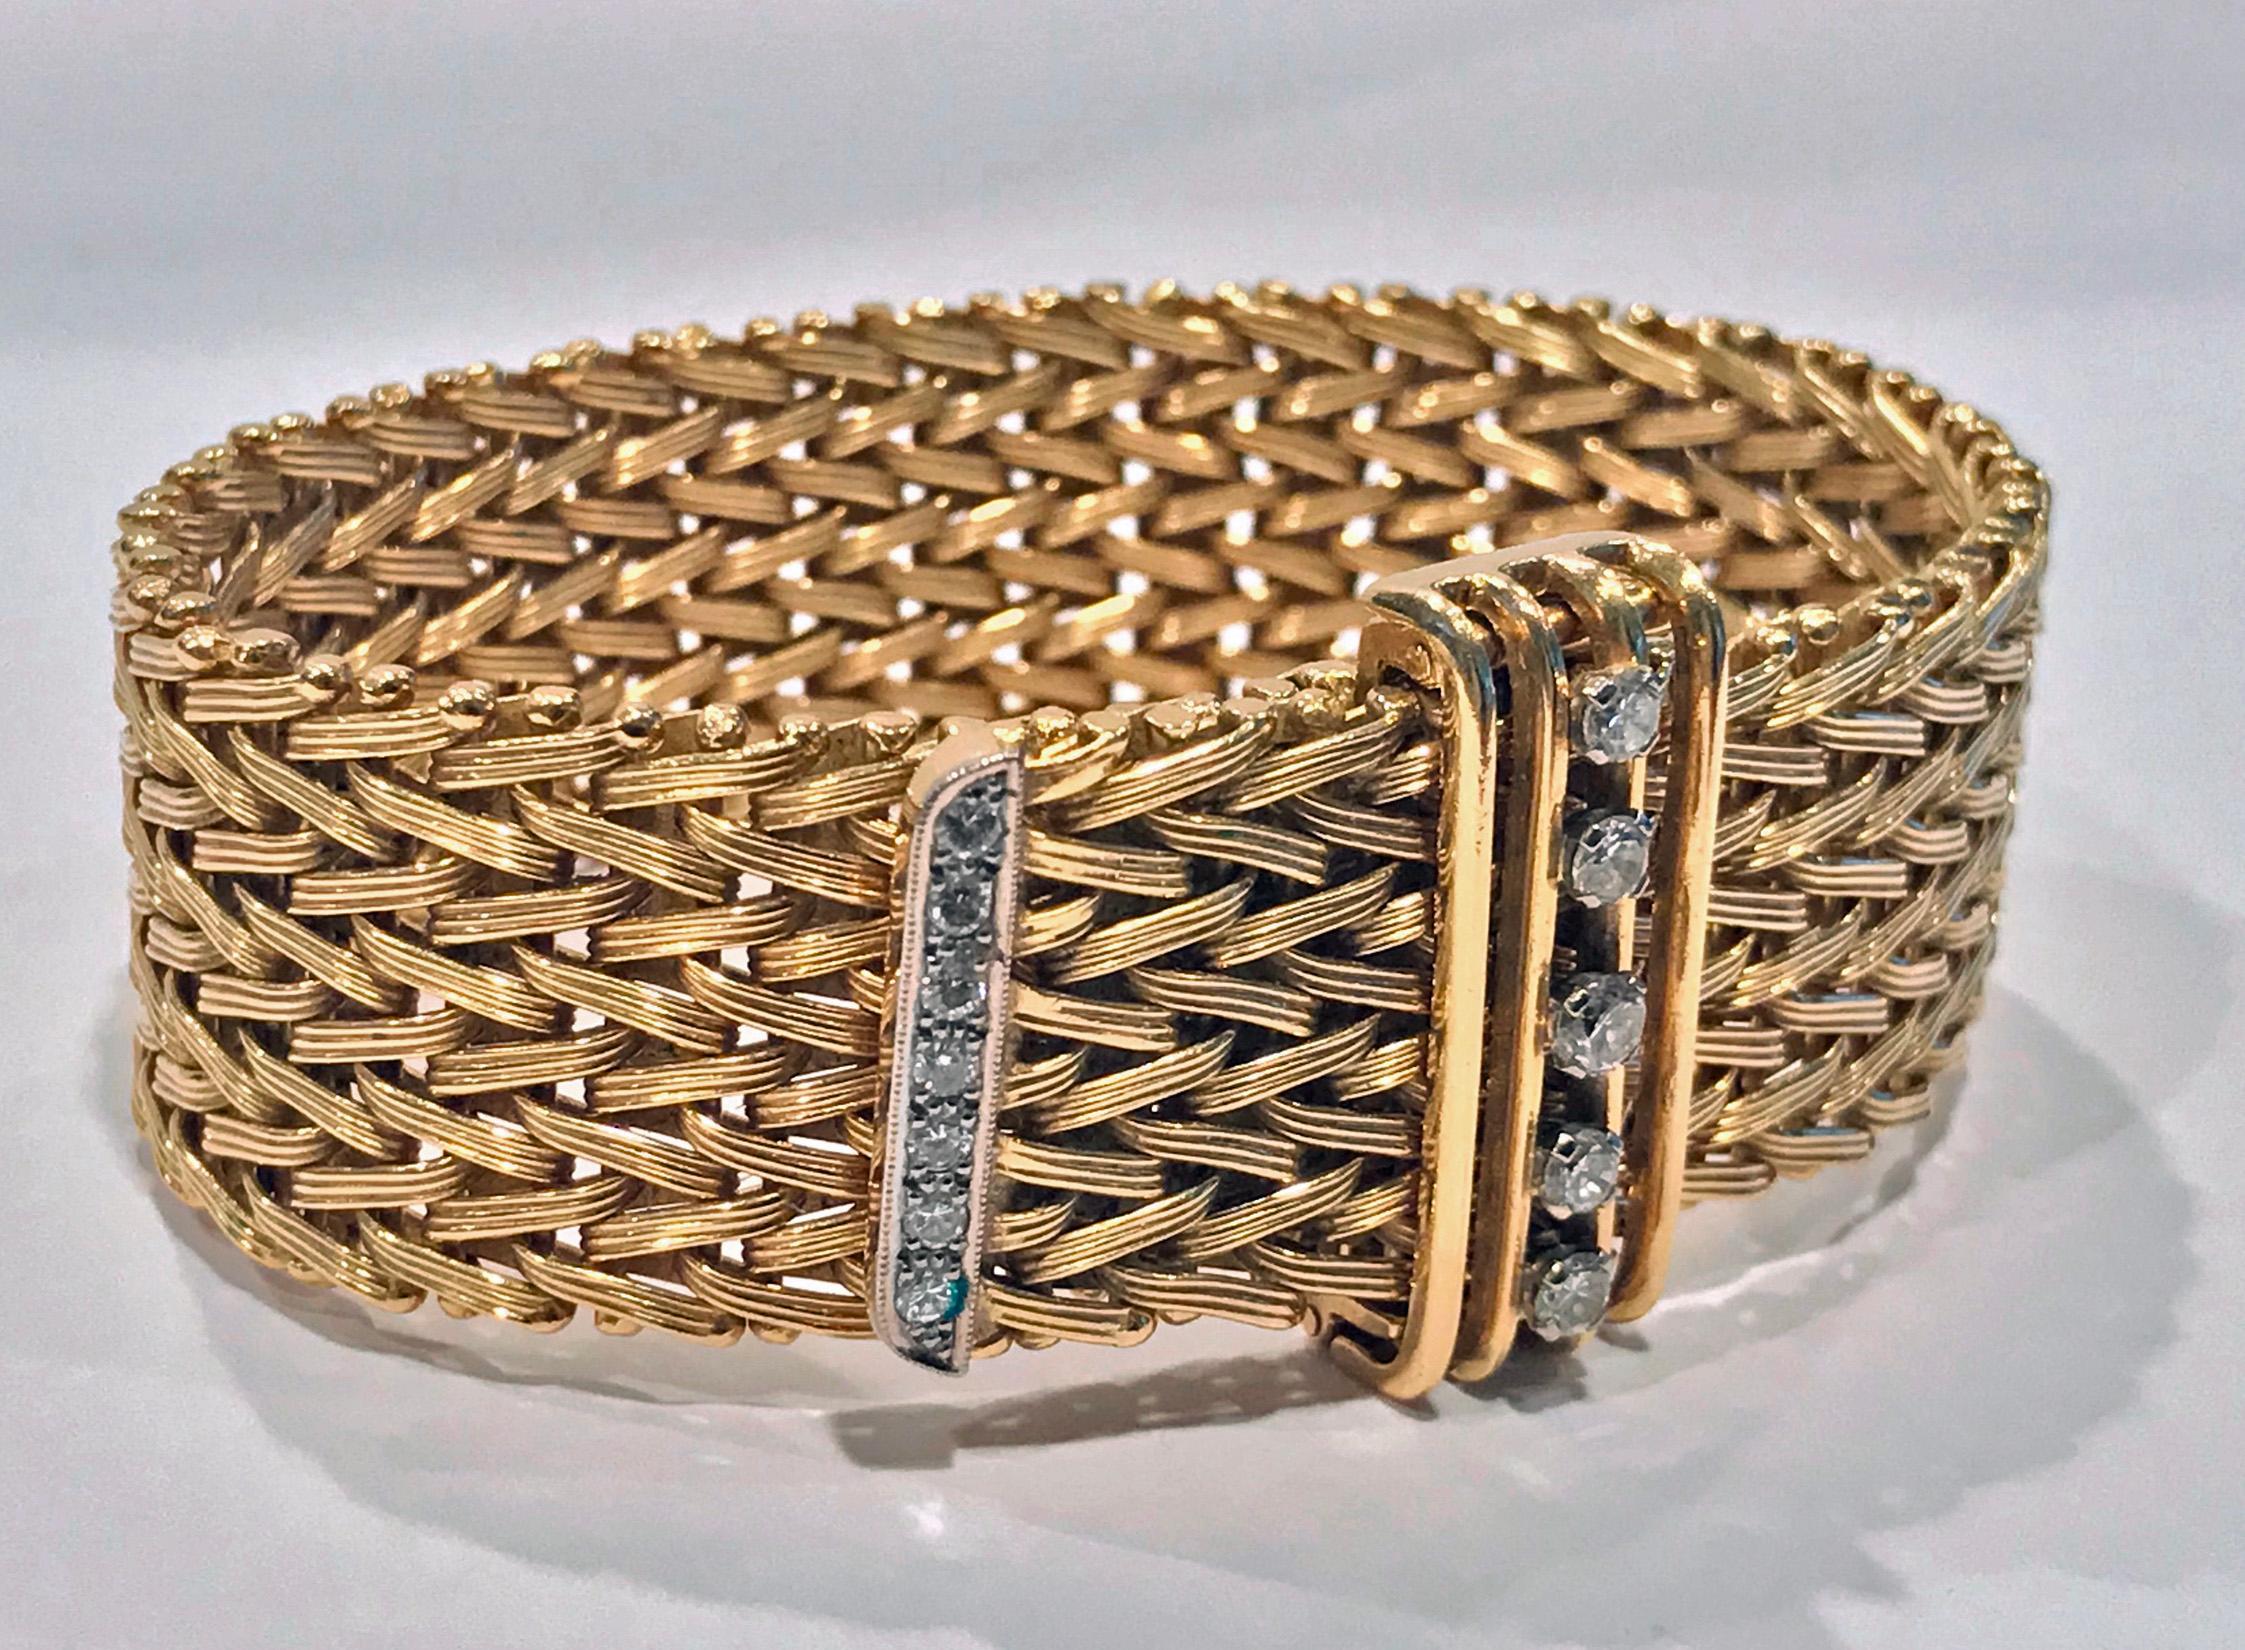 18K and Diamond mesh link wide adjustable Bracelet. The textured mesh links terminating with adjustable diamond clasp. The hinged buckle clasp allows to be worn from under 6 inches to maximum of 8 inches. Twelve round cut diamonds, total weight